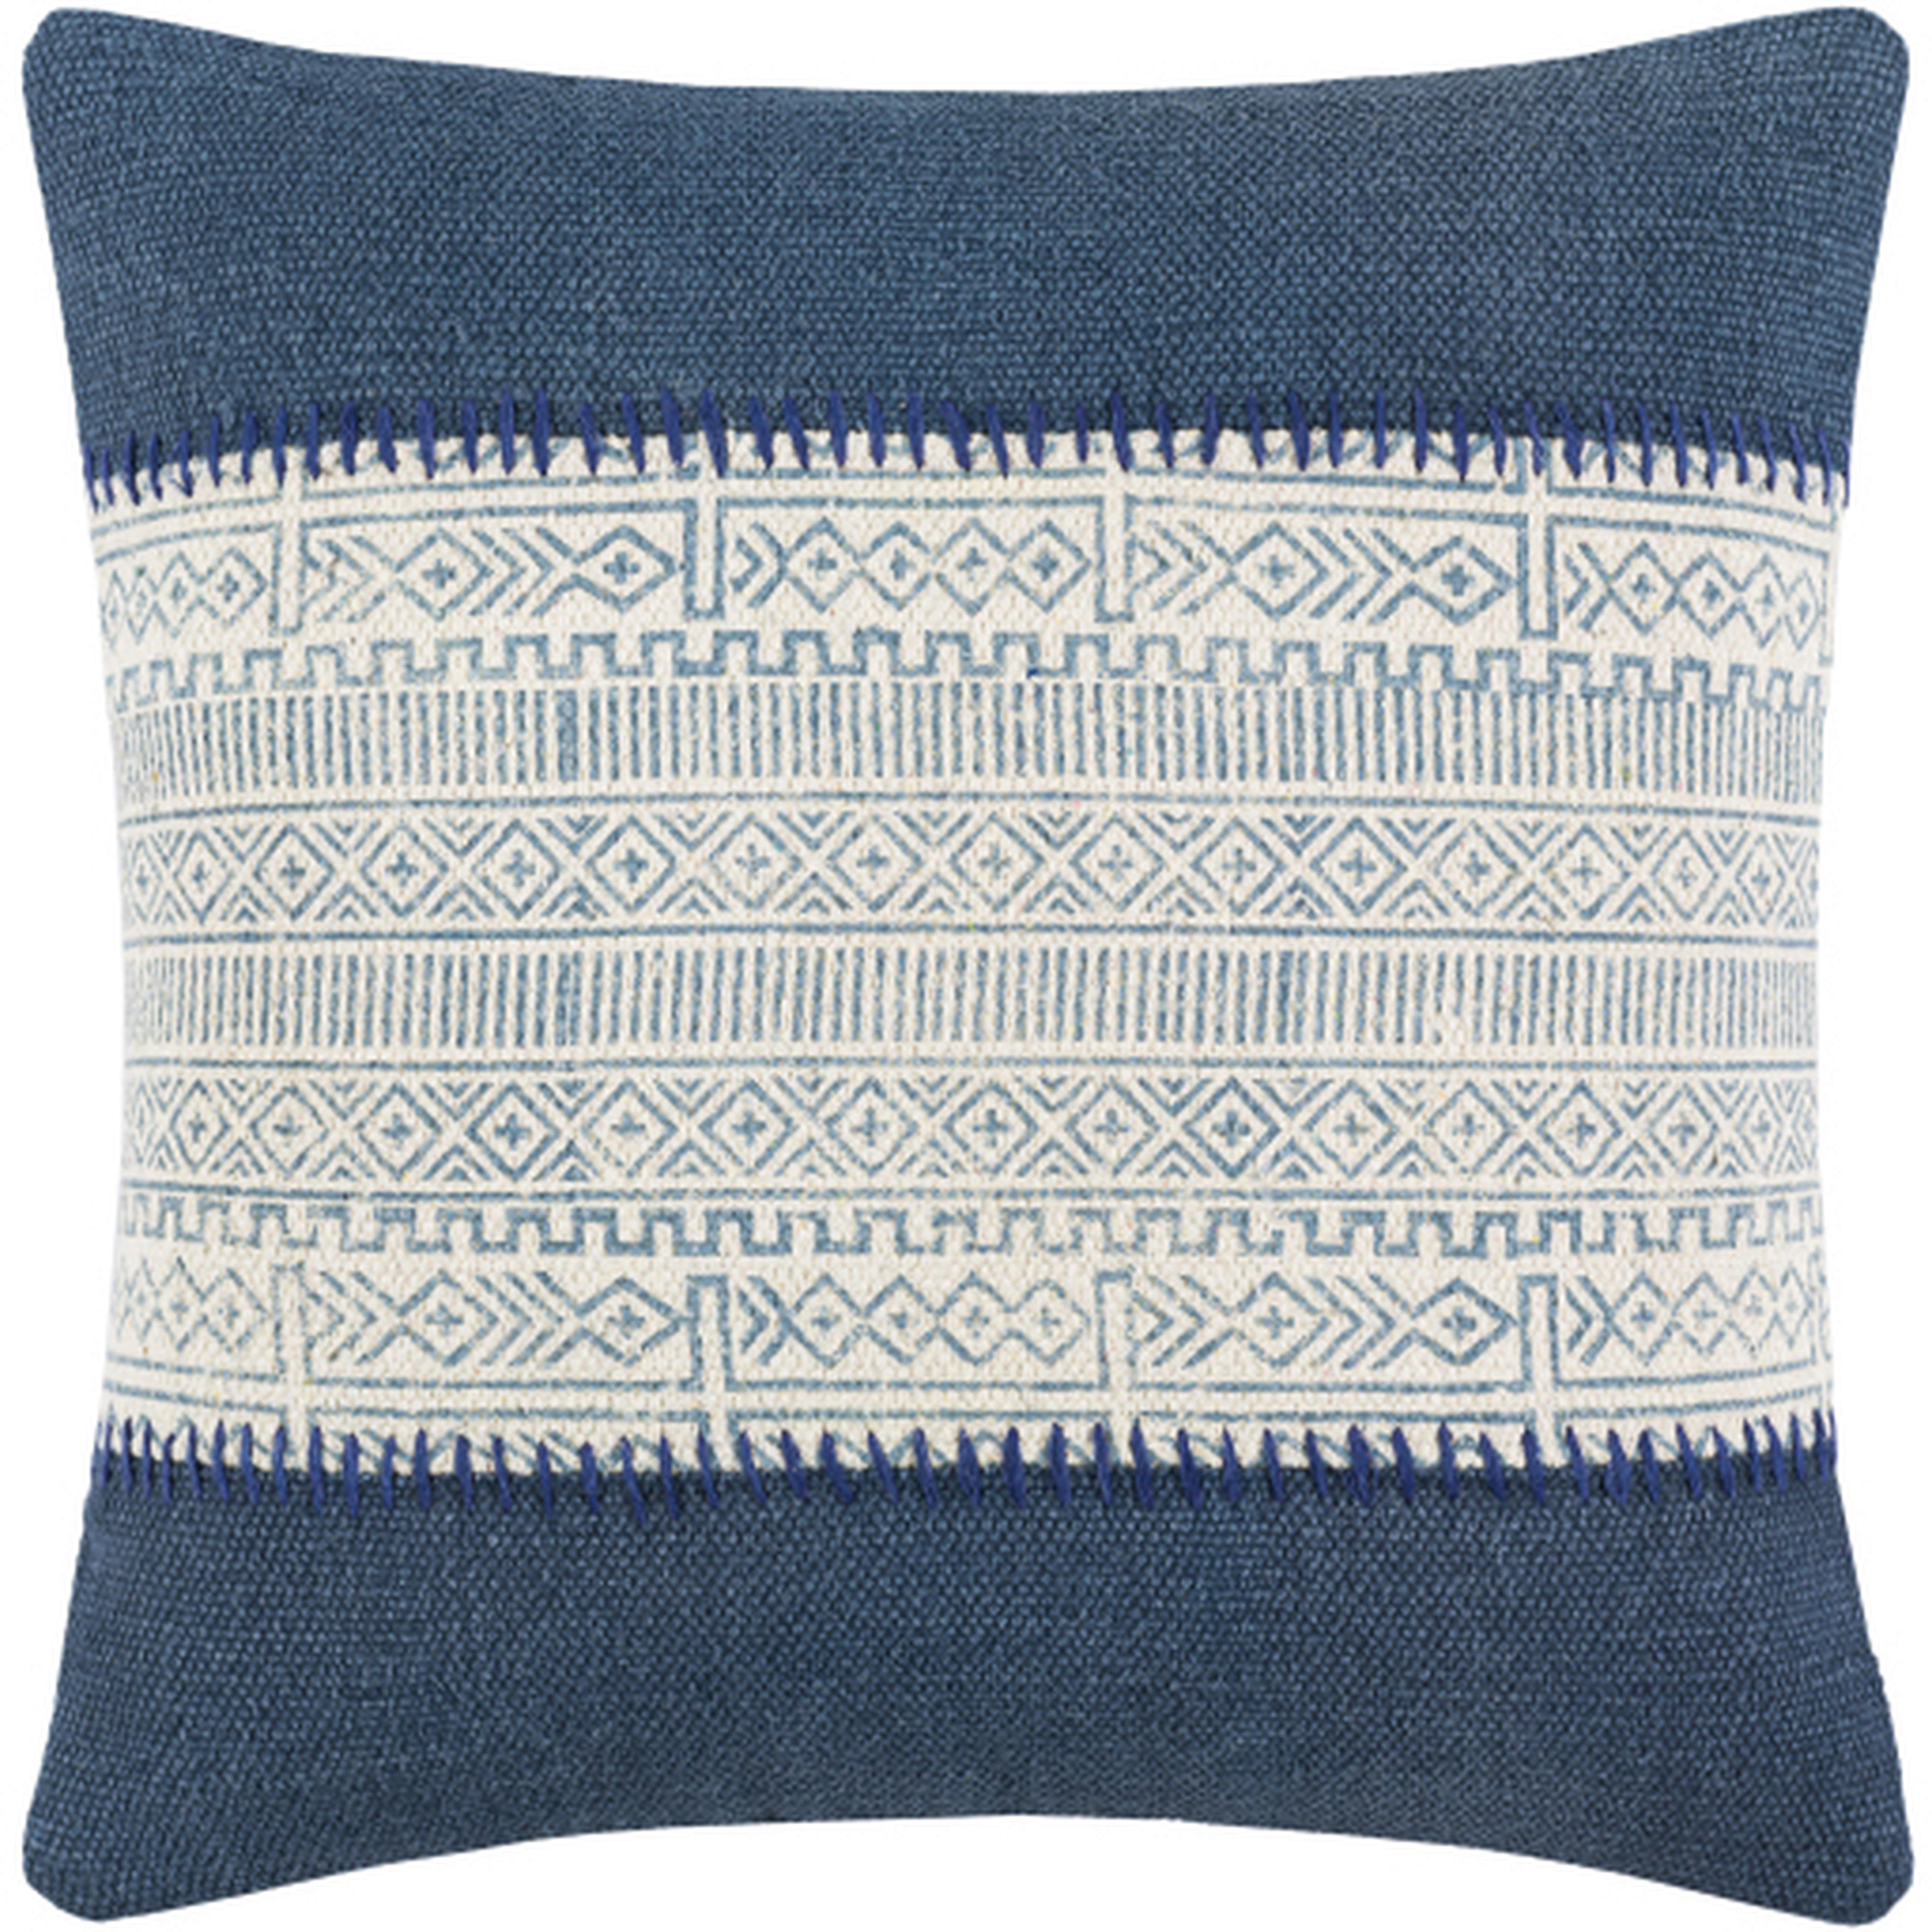 Lola Throw Pillow, 20" x 20", with down insert - Surya